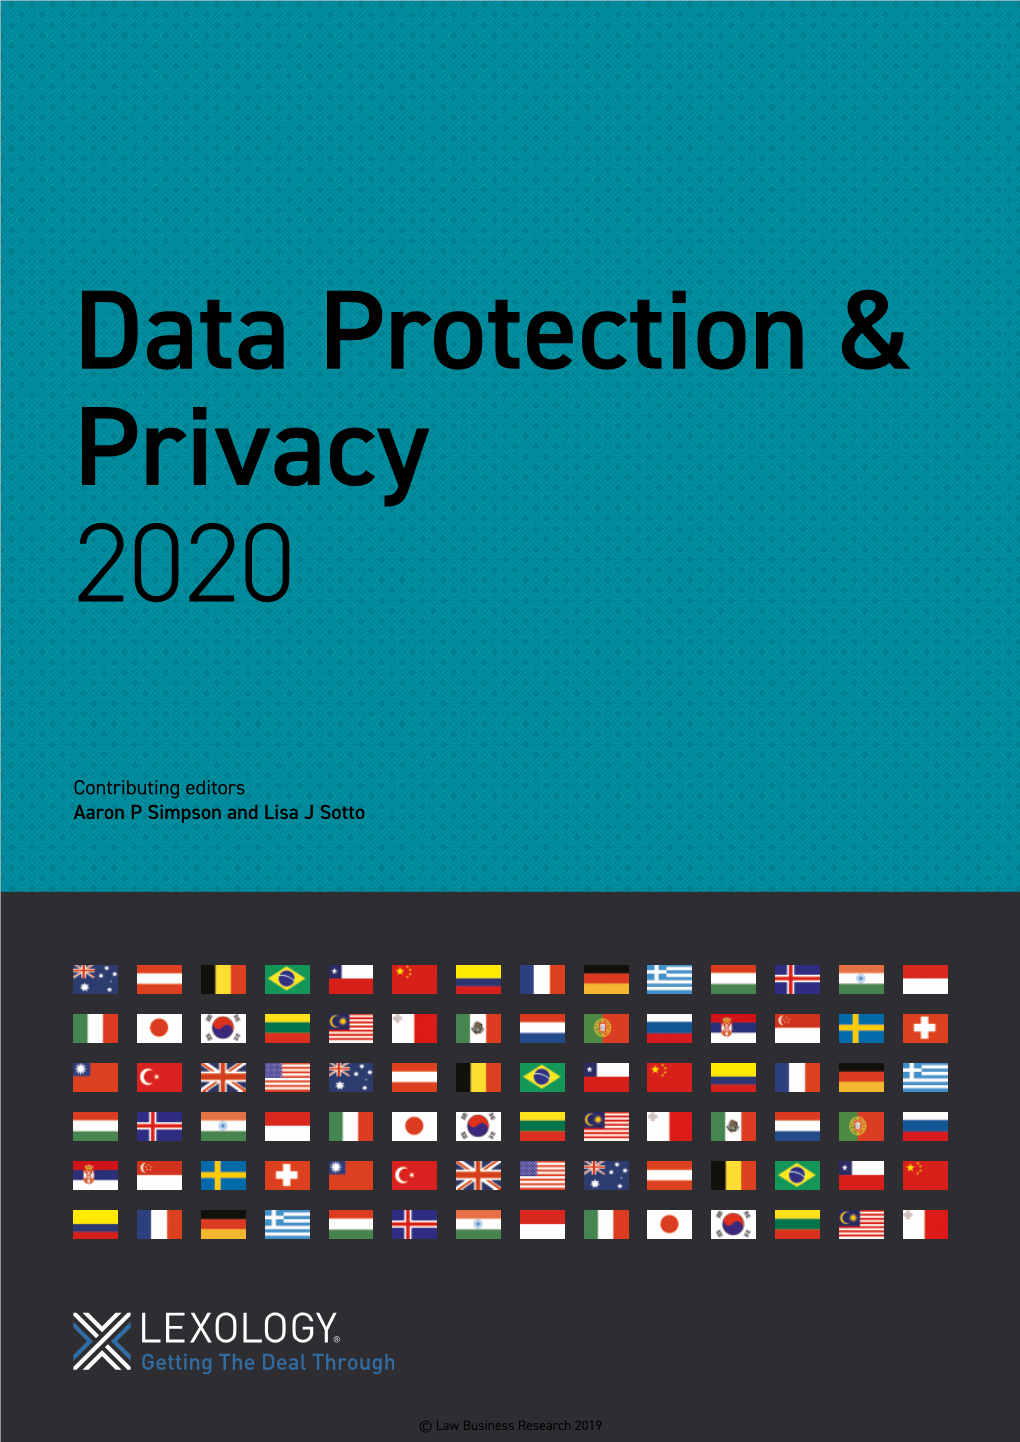 Data Protection & Privacy 2020